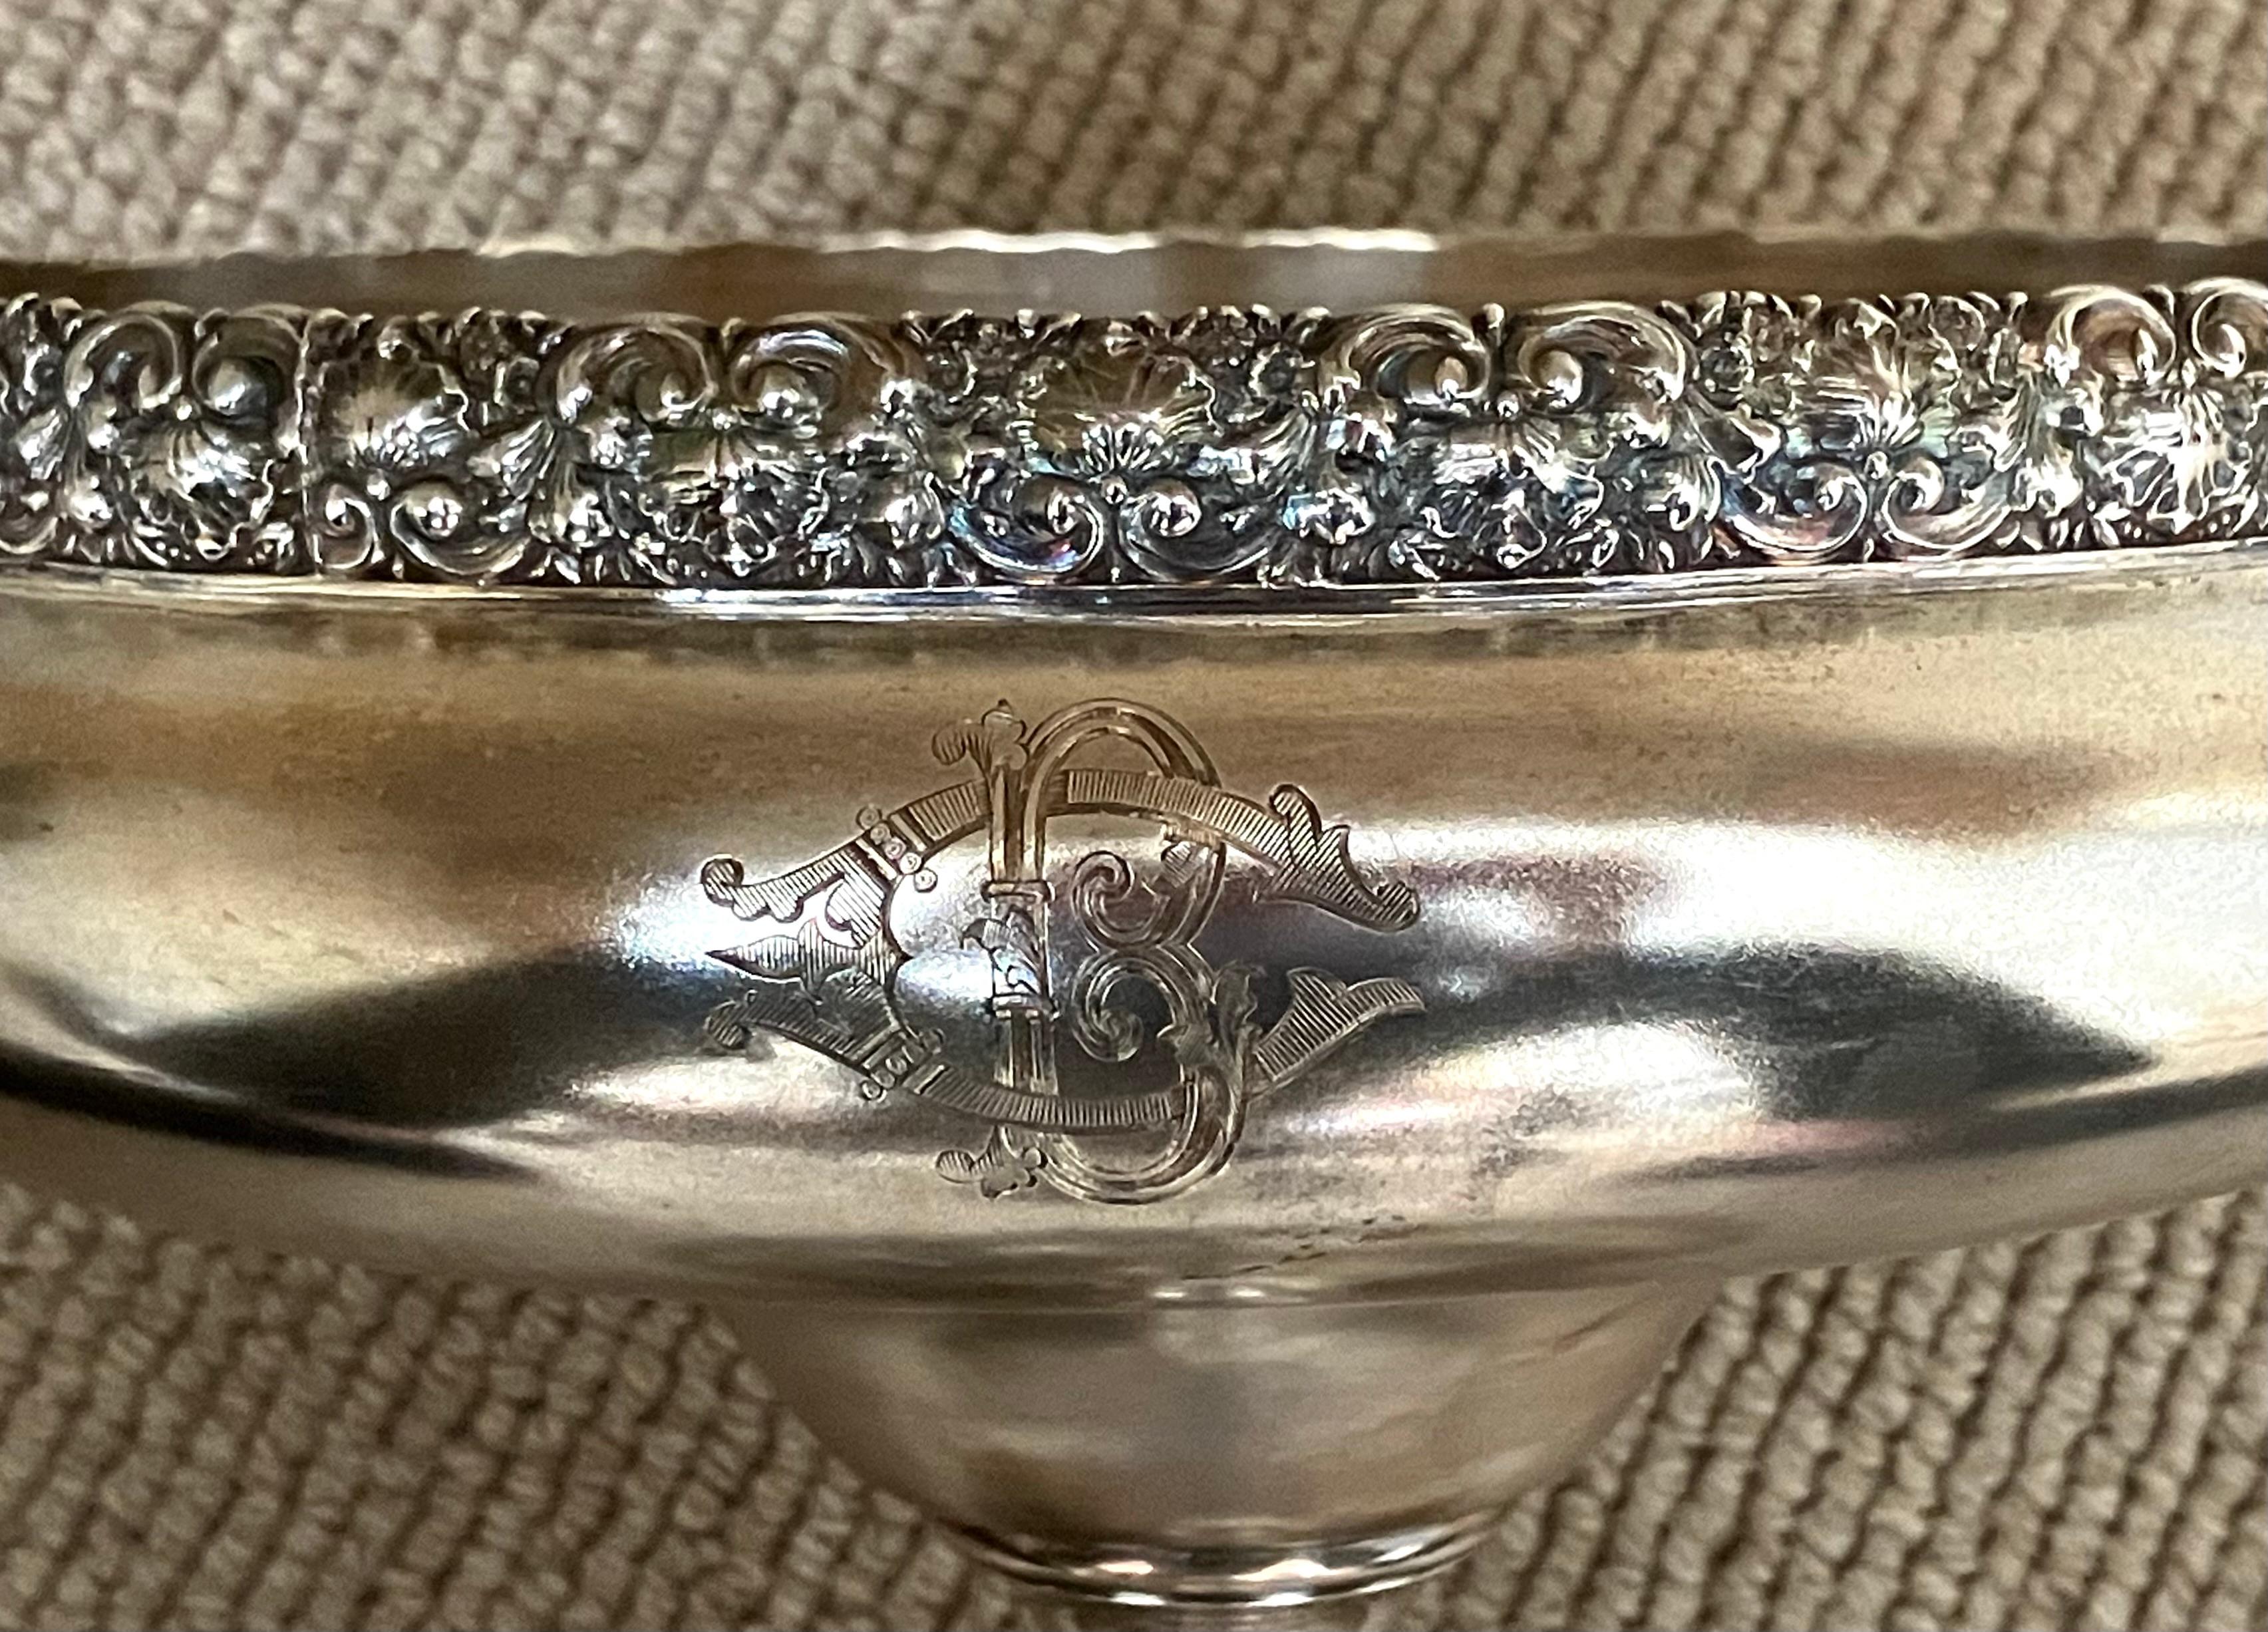 19th Century  Tiffany Gilt-Washed Sterling Silver Center Bowl Circa 1873-1891